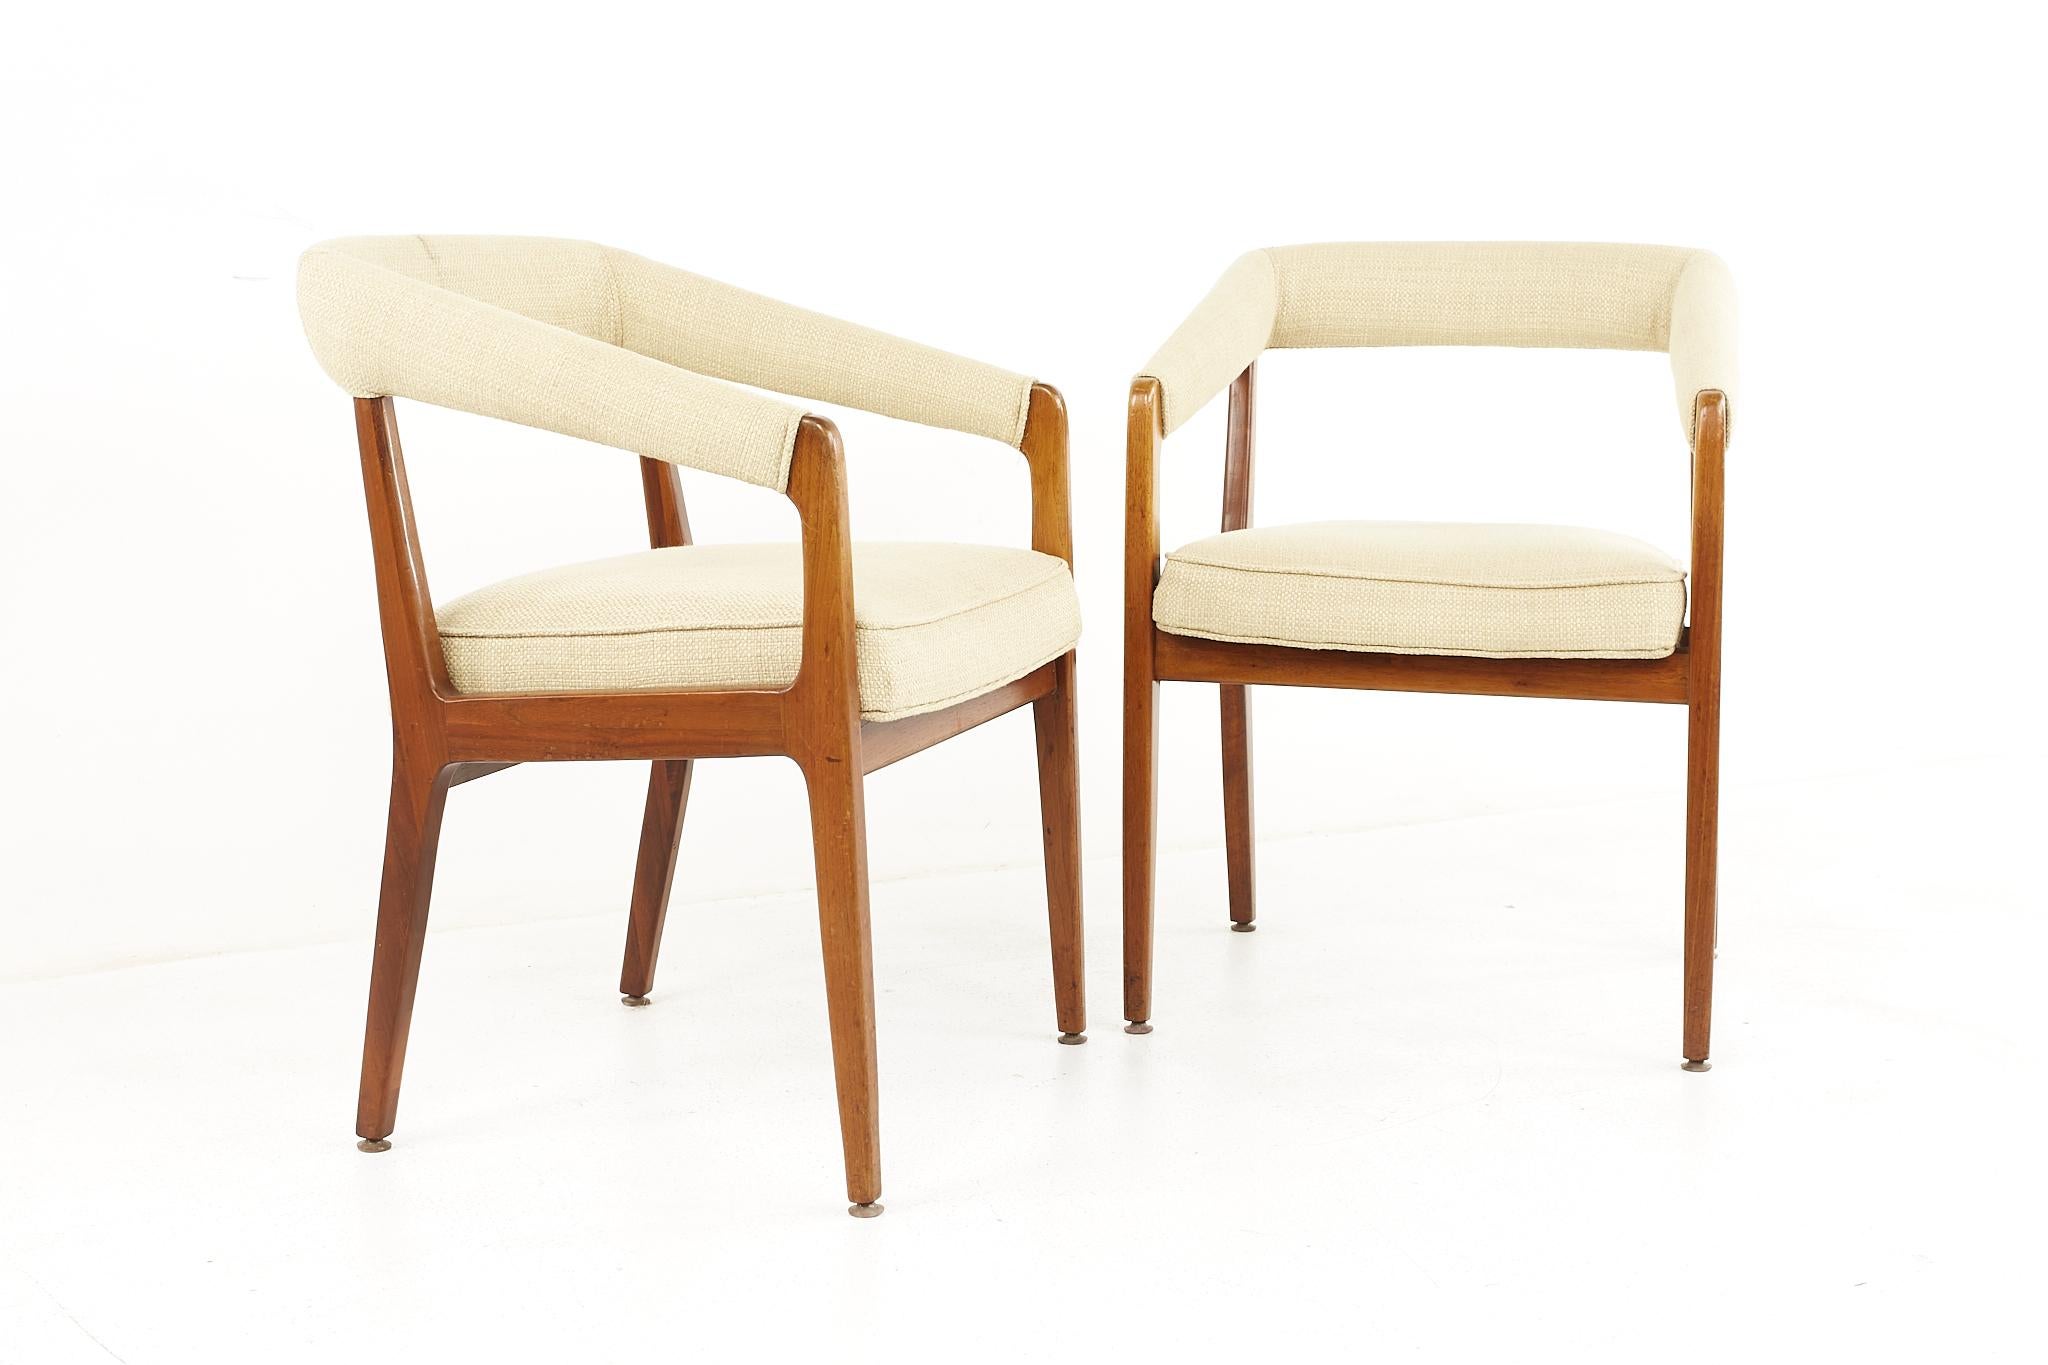 Kai Kristiansen Style Mid Century Danish Teak Occasional Lounge Chairs - A Pair

Each chair measures: 23 wide x 21 deep x 30.5 high, with a seat of 19 inches and arm height of 25 inches 

All pieces of furniture can be had in what we call